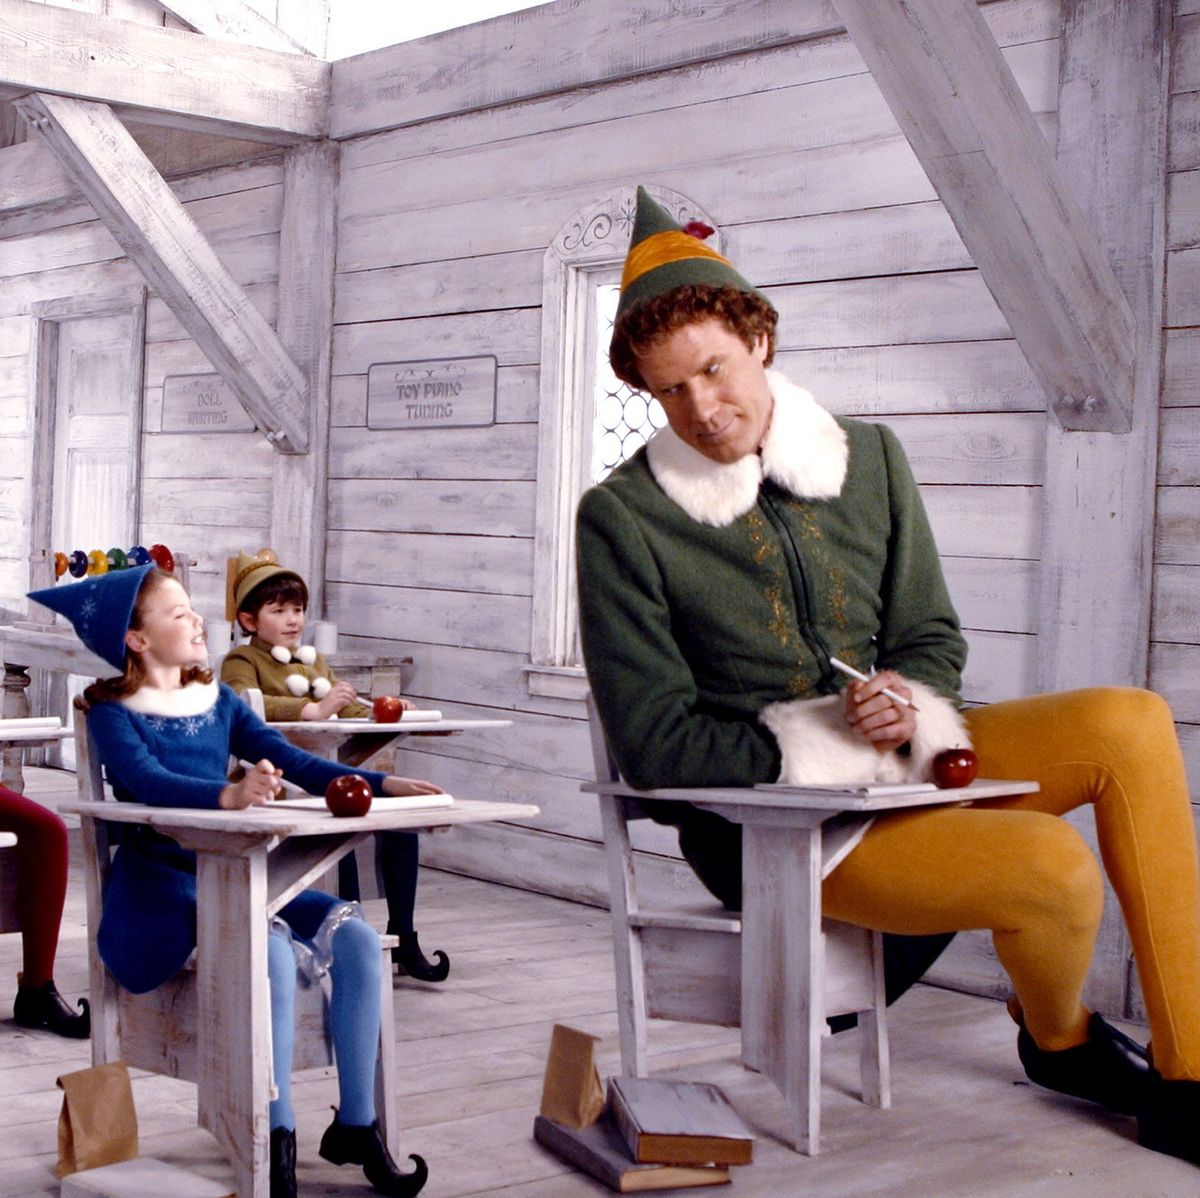 45 Best Elf Movie Quotes - Funny Buddy the Elf Quotes